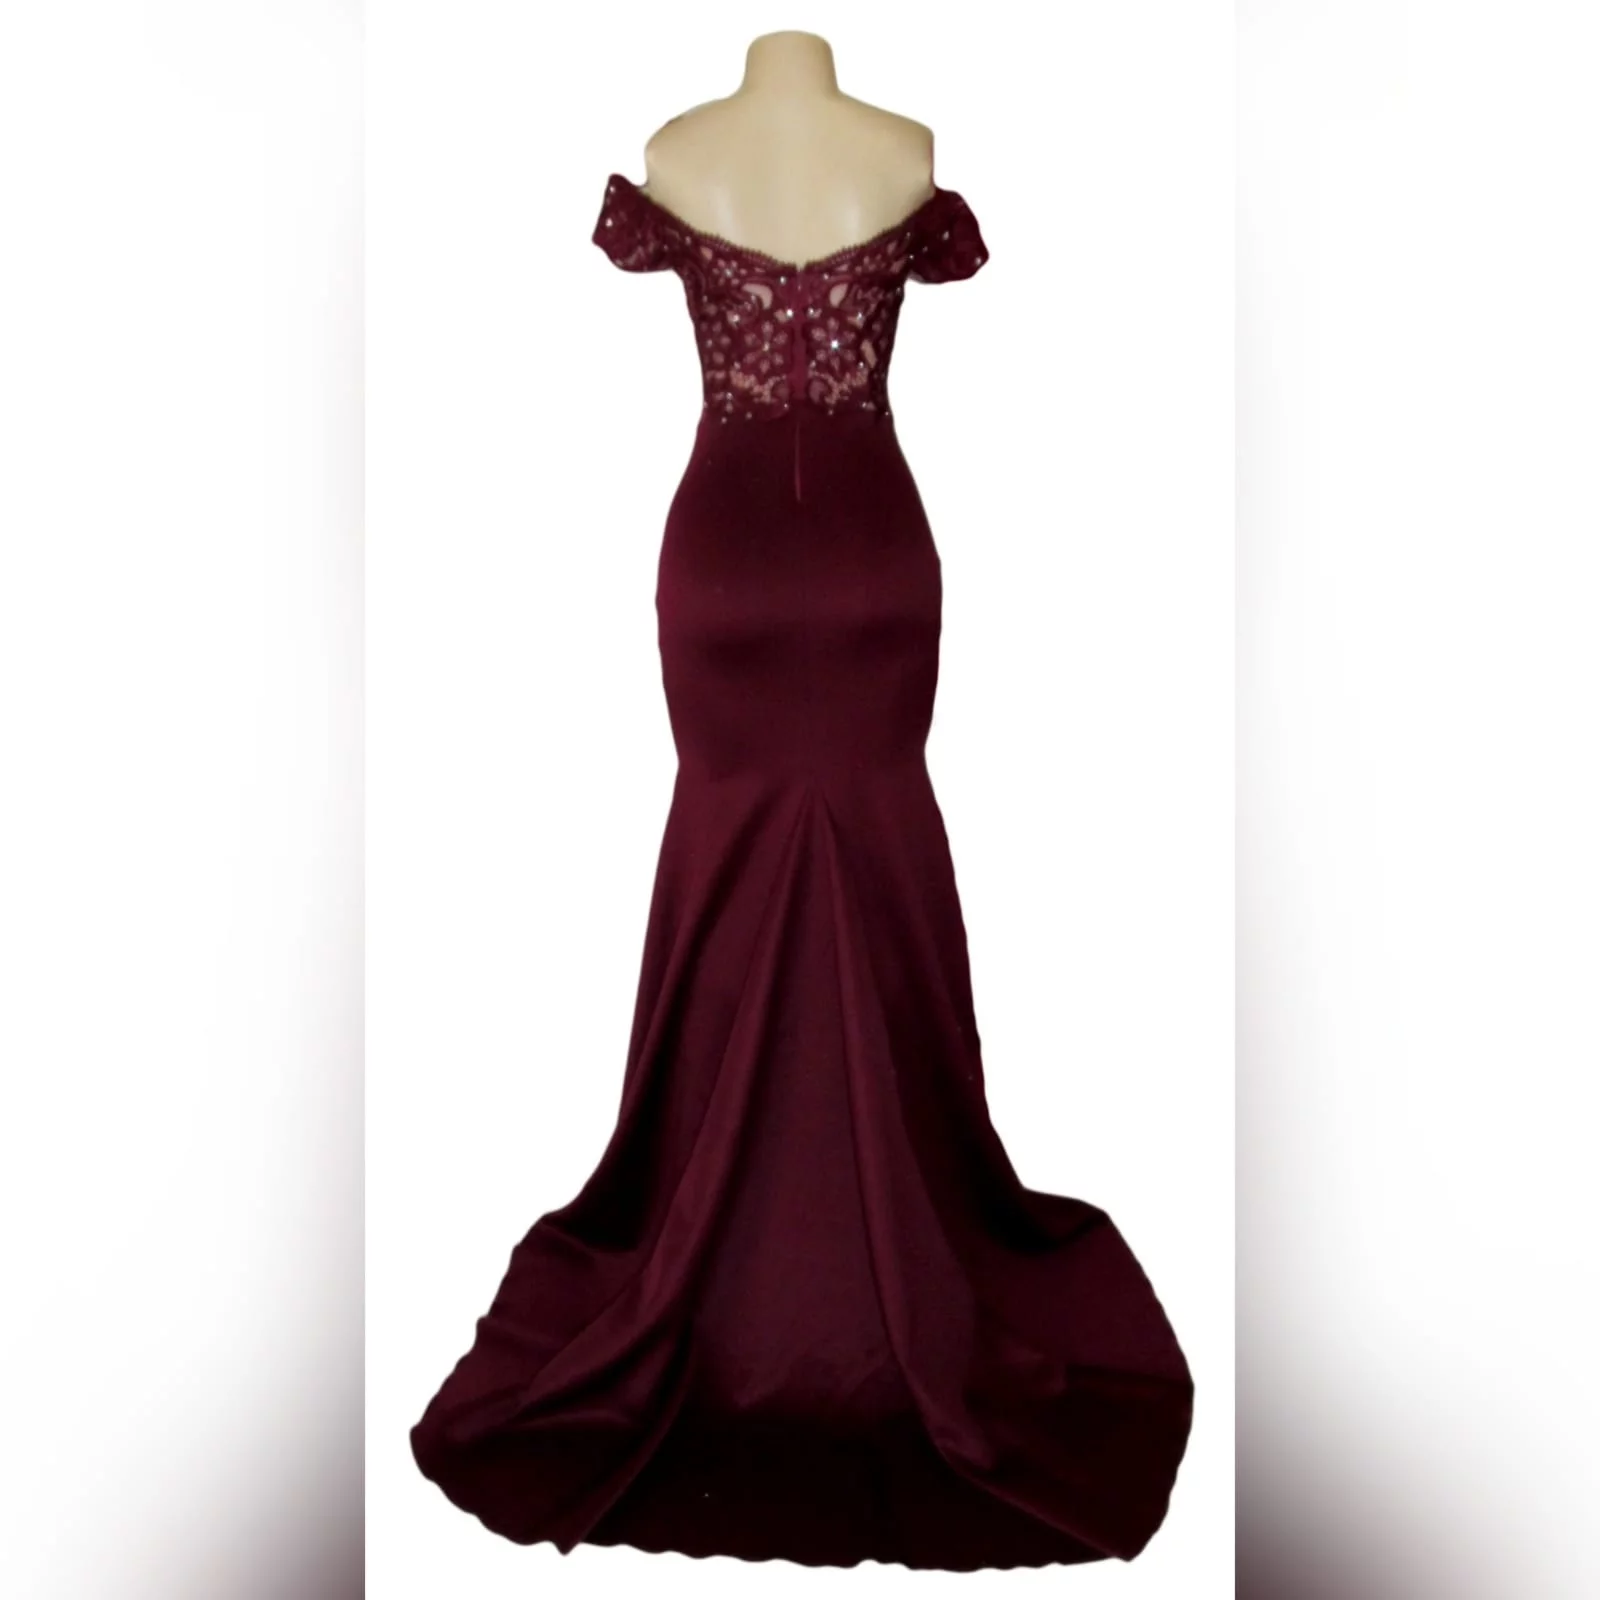 Burgundy off shoulder long matric dance dress 3 burgundy off shoulder long matric dance dress. With an illusion bodice detailed with lace and beads and off-shoulder short sleeves. Bottom fitted till hip, with a high slit and a train for a touch of sexy and drama.